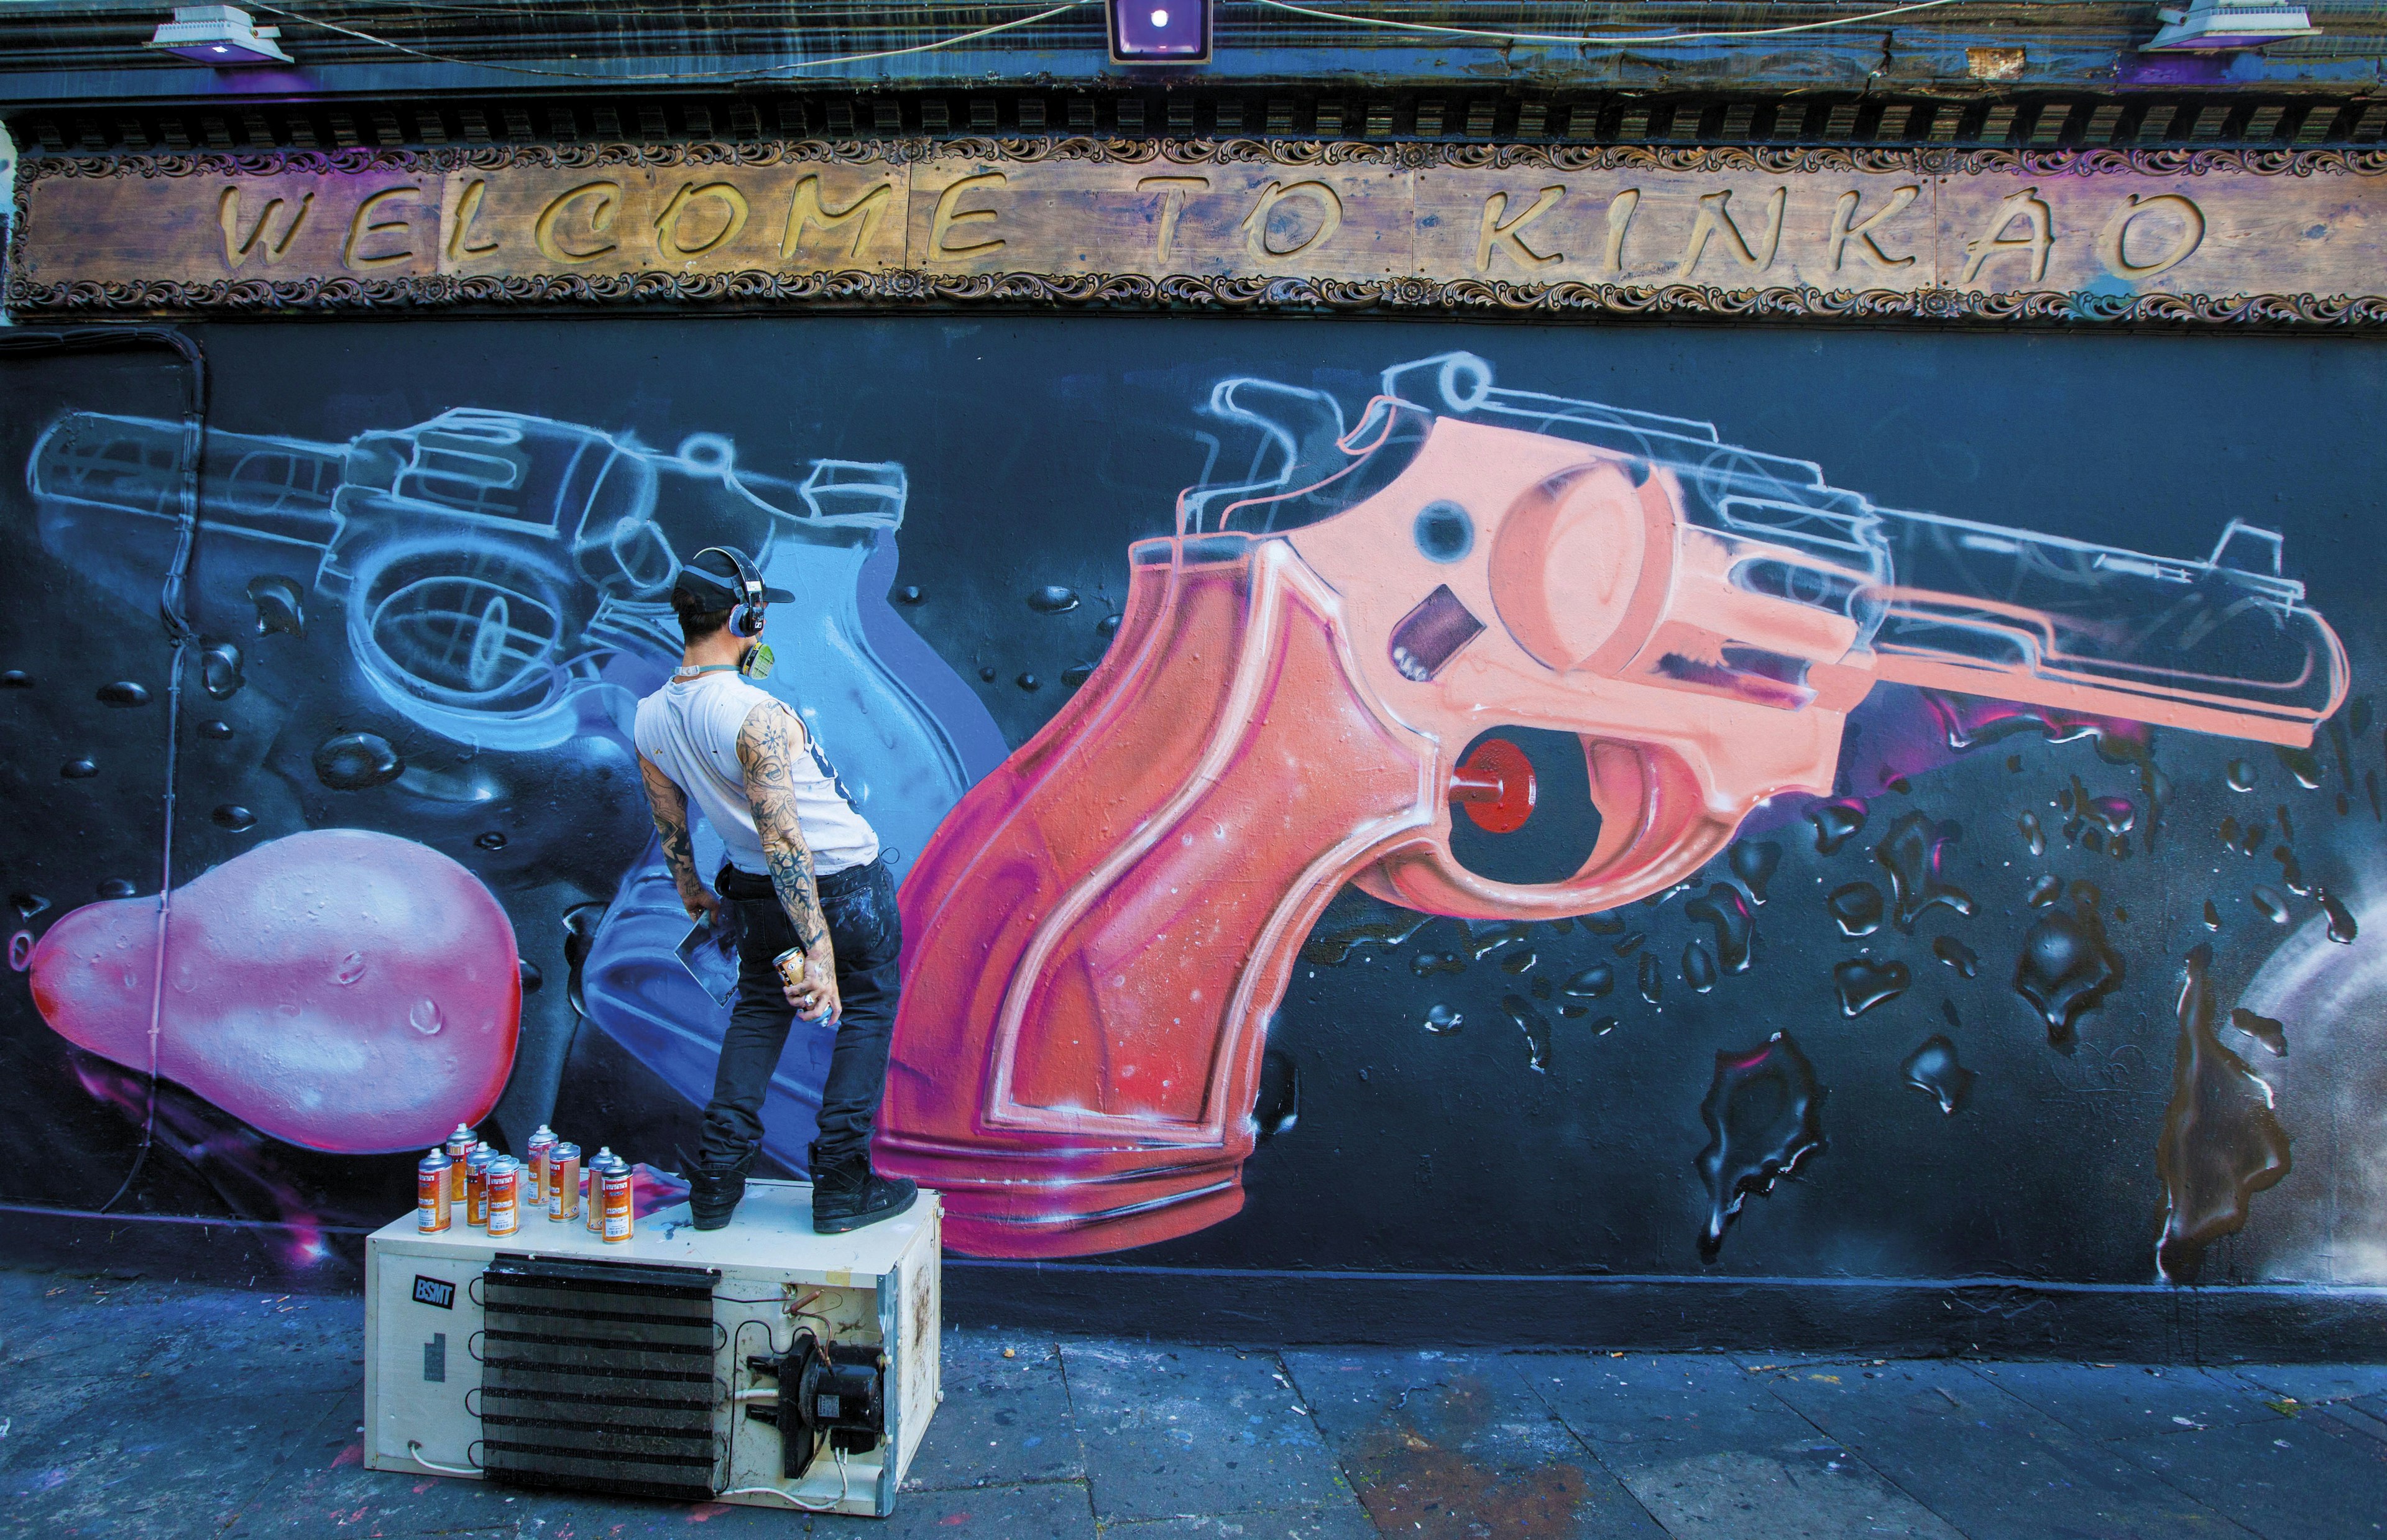 A street artist spray paints two colourful guns onto the wall of Kinkao Korean, in Shoreditch.